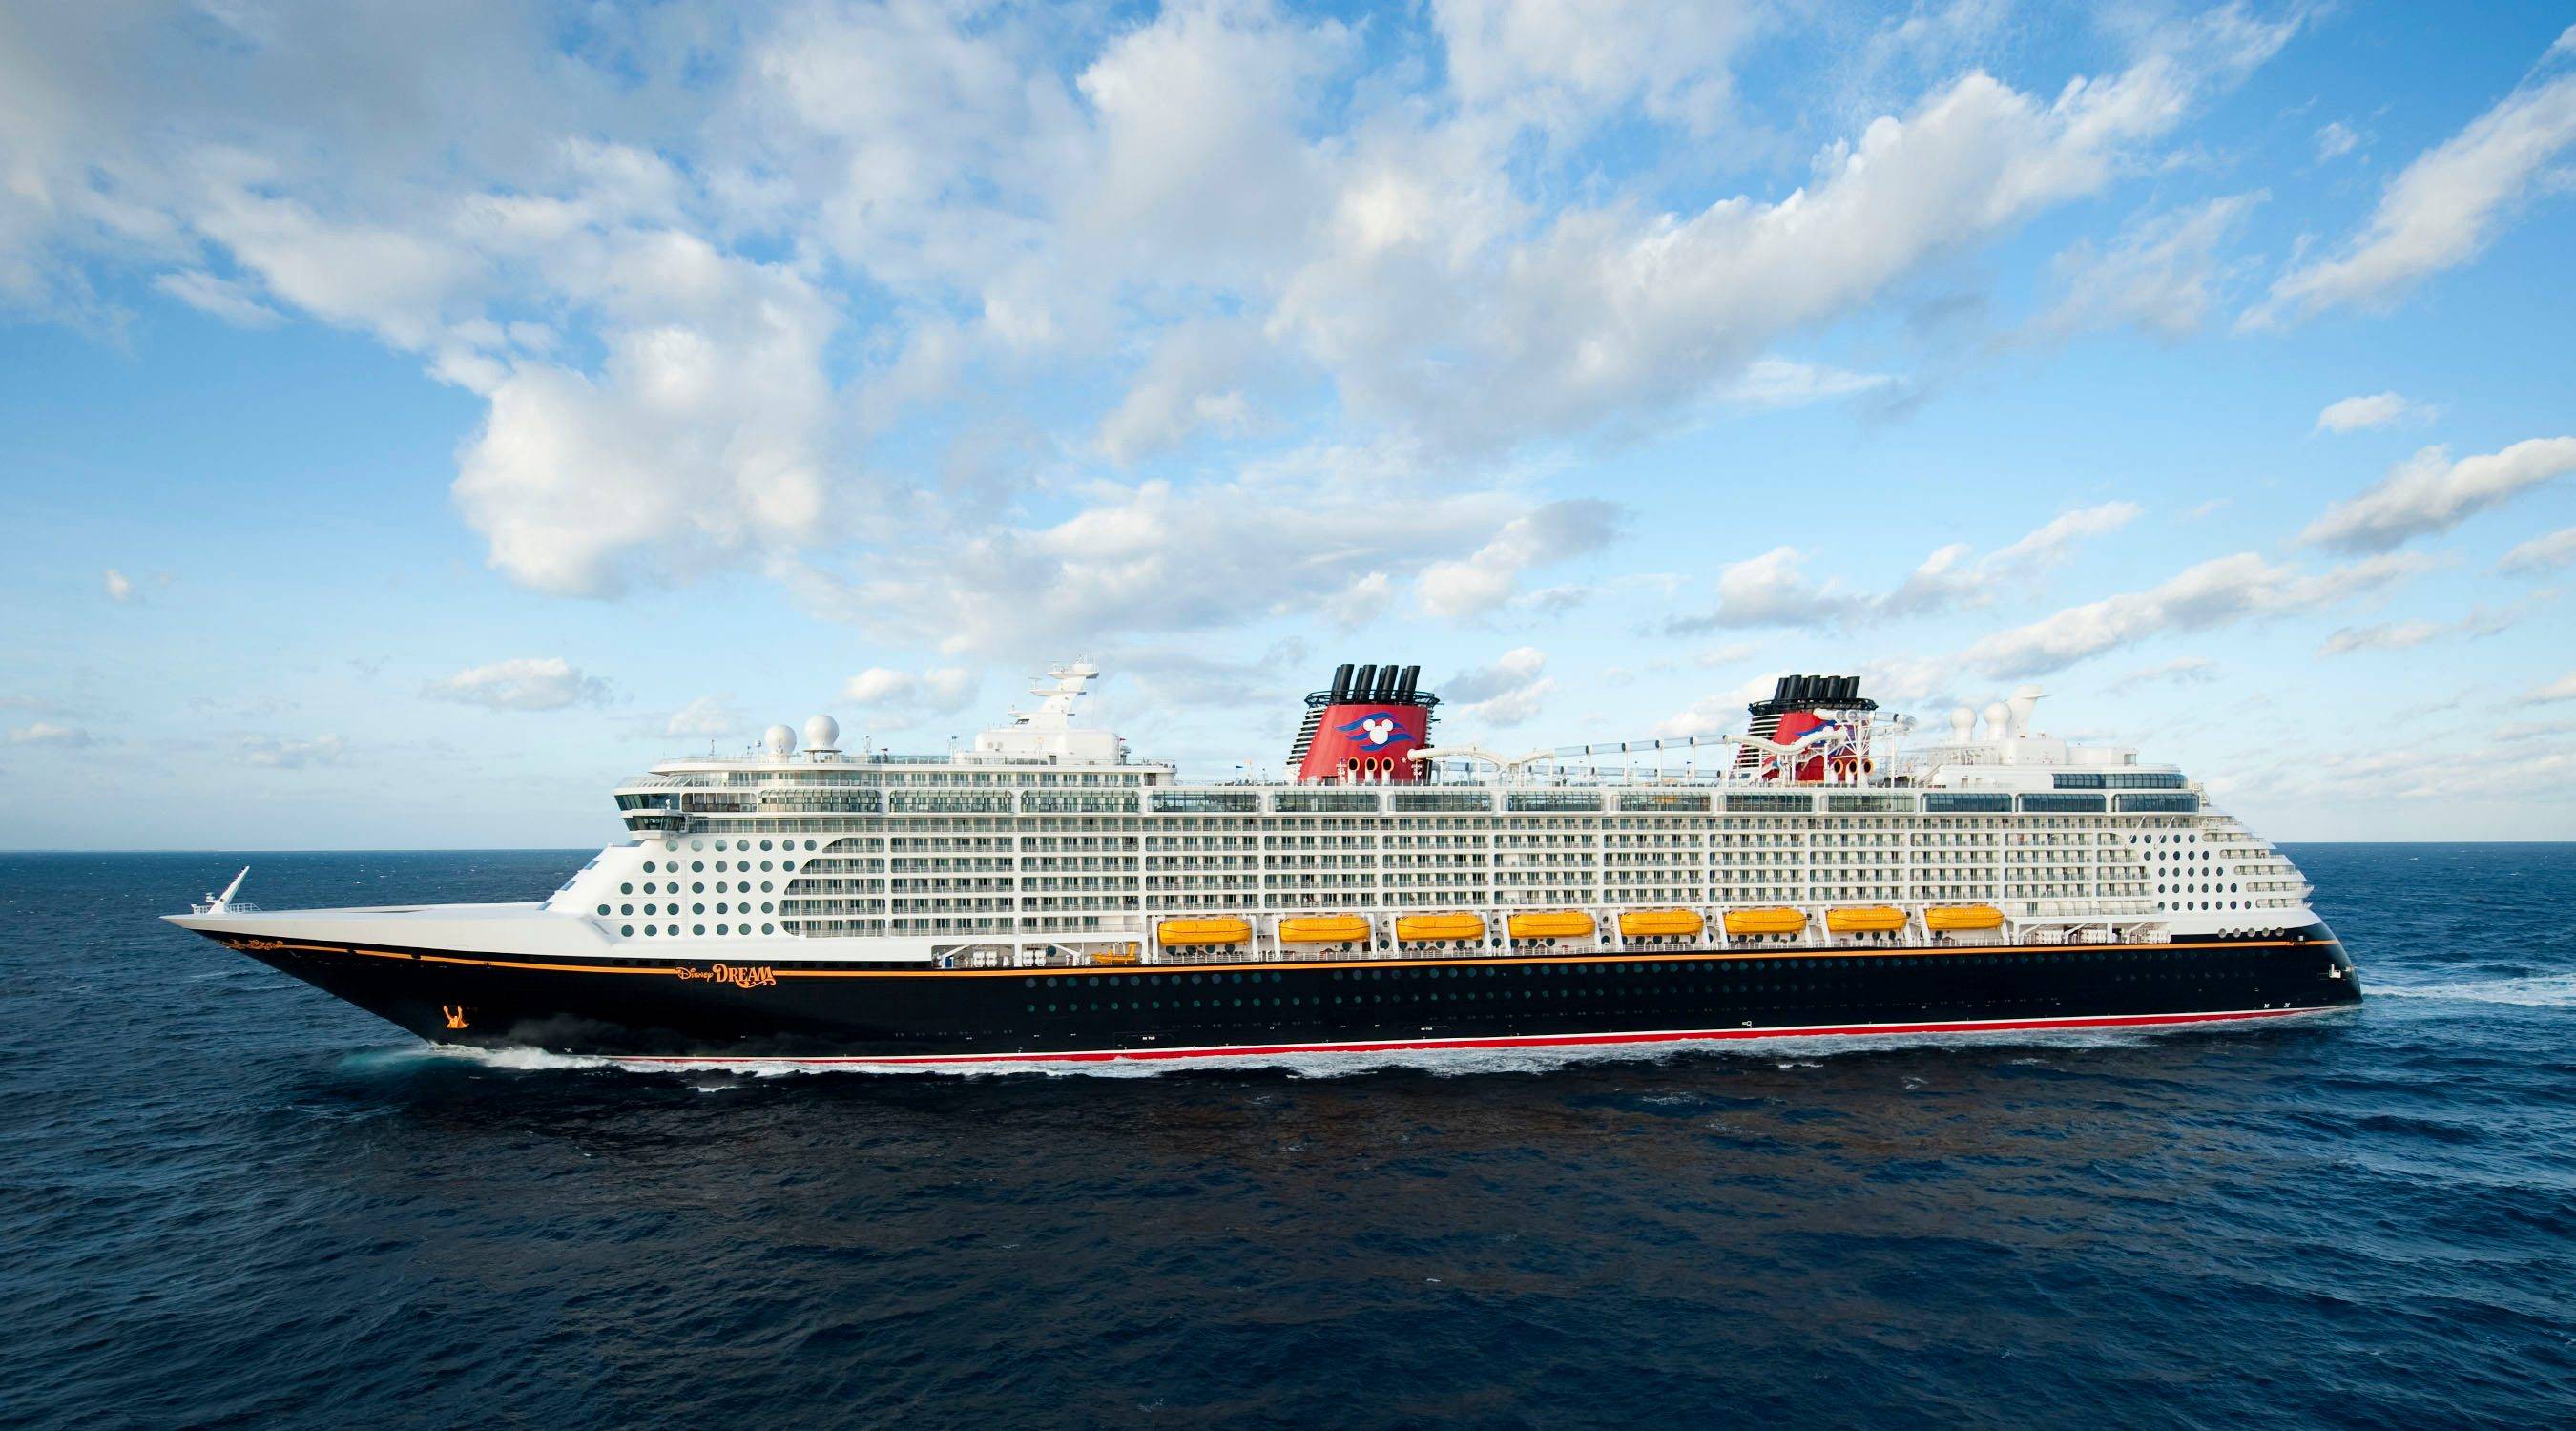 Disney Cruise Line returns after more than a year of suspended sailings